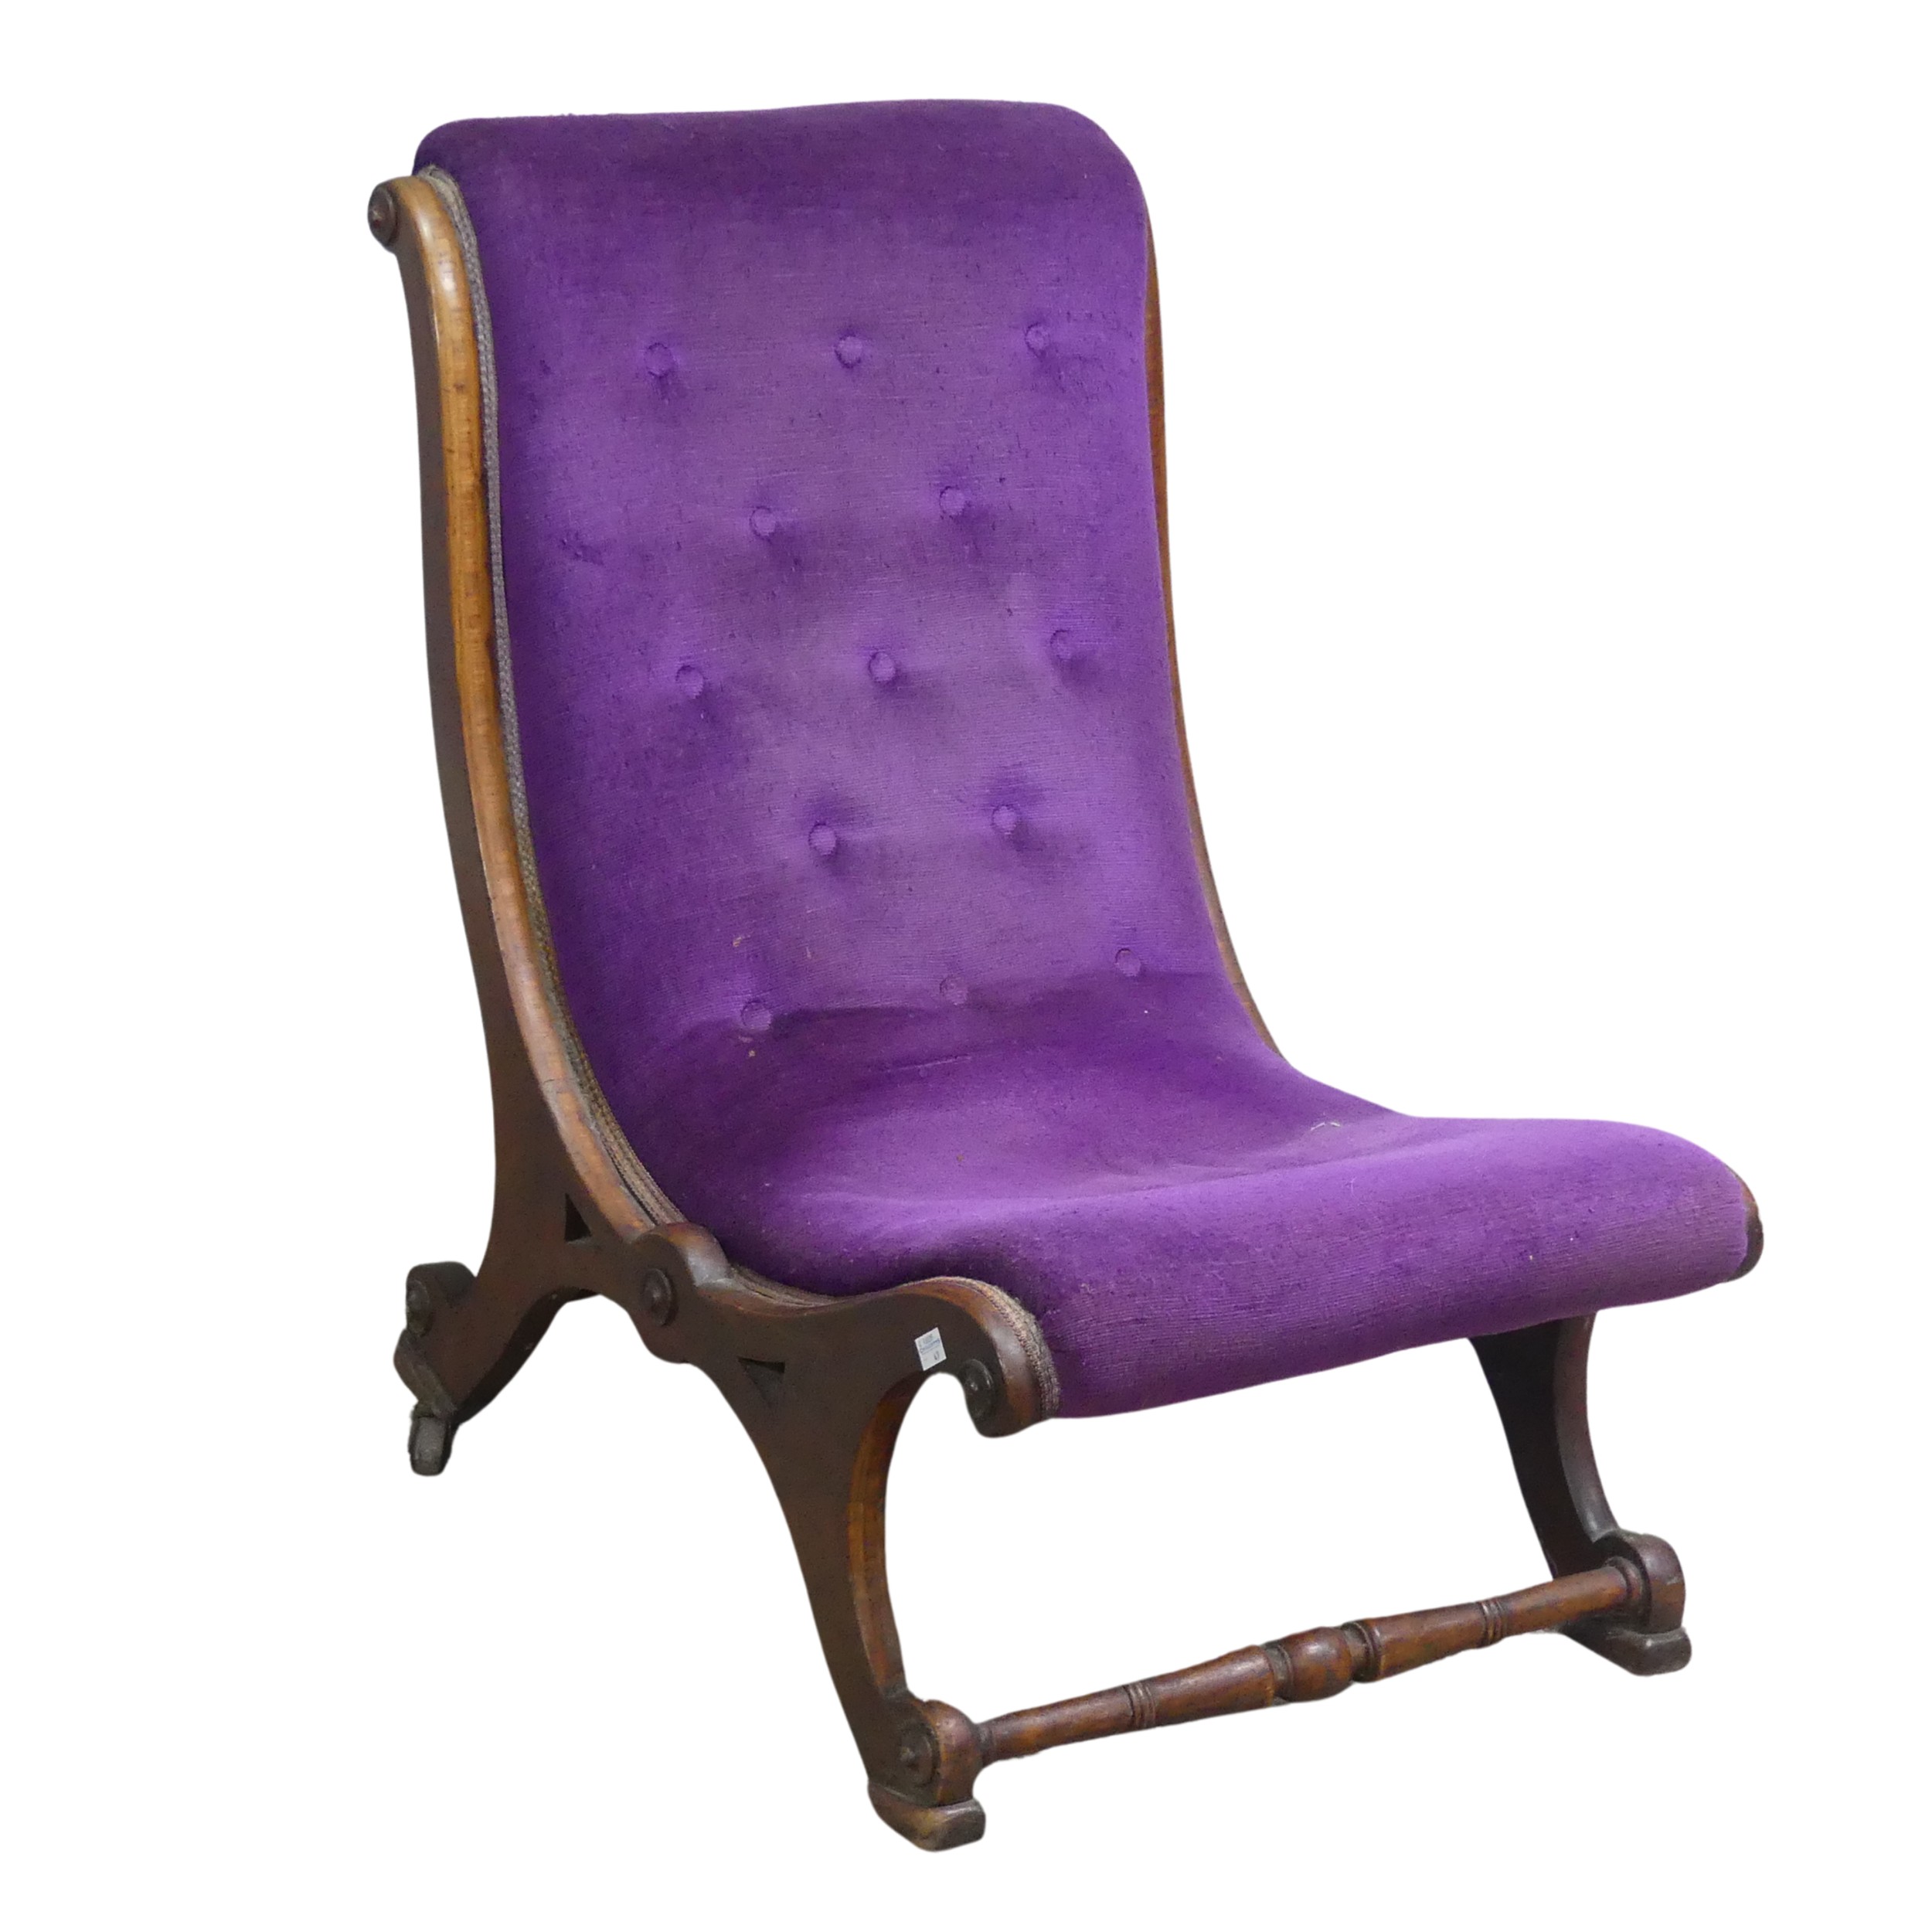 An antique Regency style scroll mahogany Nursing Chair, with button-back purple upholstery, W 40